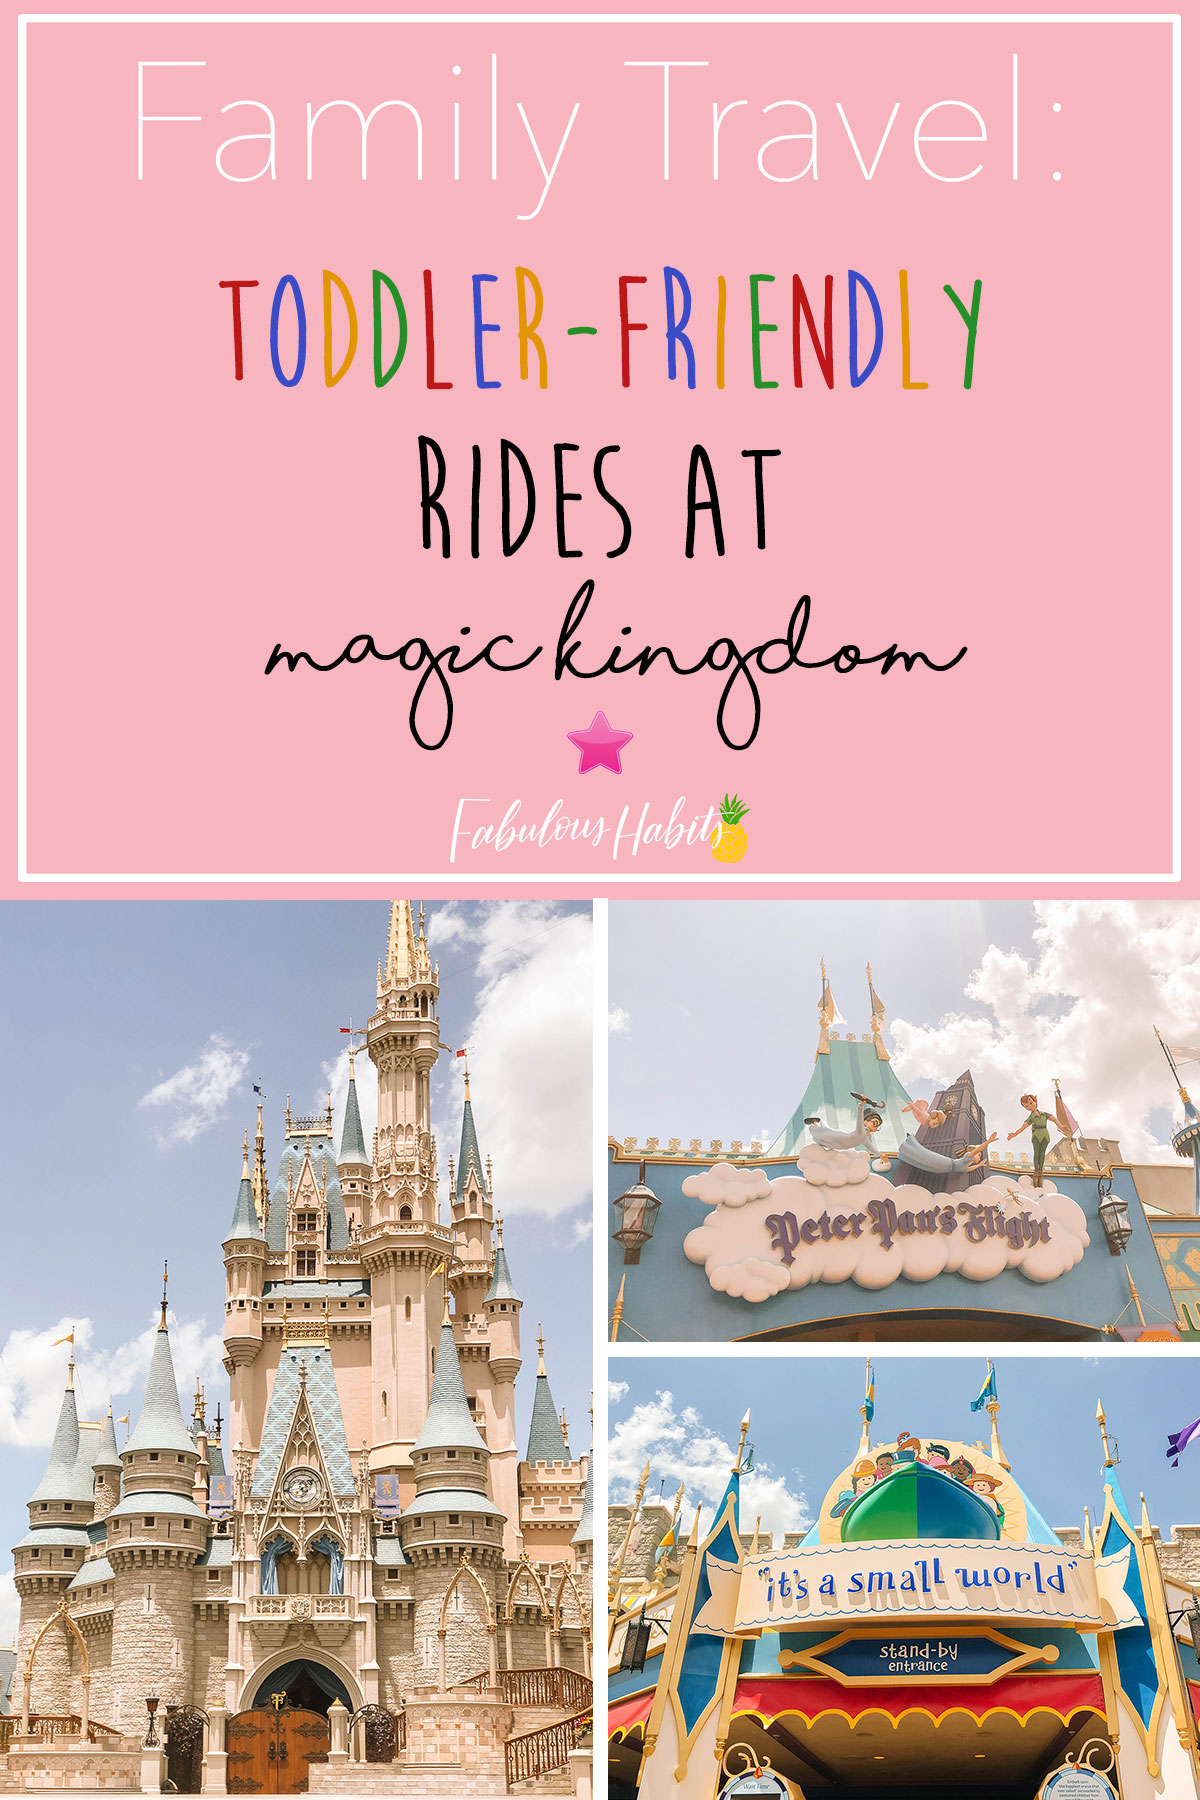 Planning a trip to Disney with young kids? Check out our ultimate guide to the best Magic Kingdom toddler rides - because having fun at WDW is possible for all ages! #disneytips